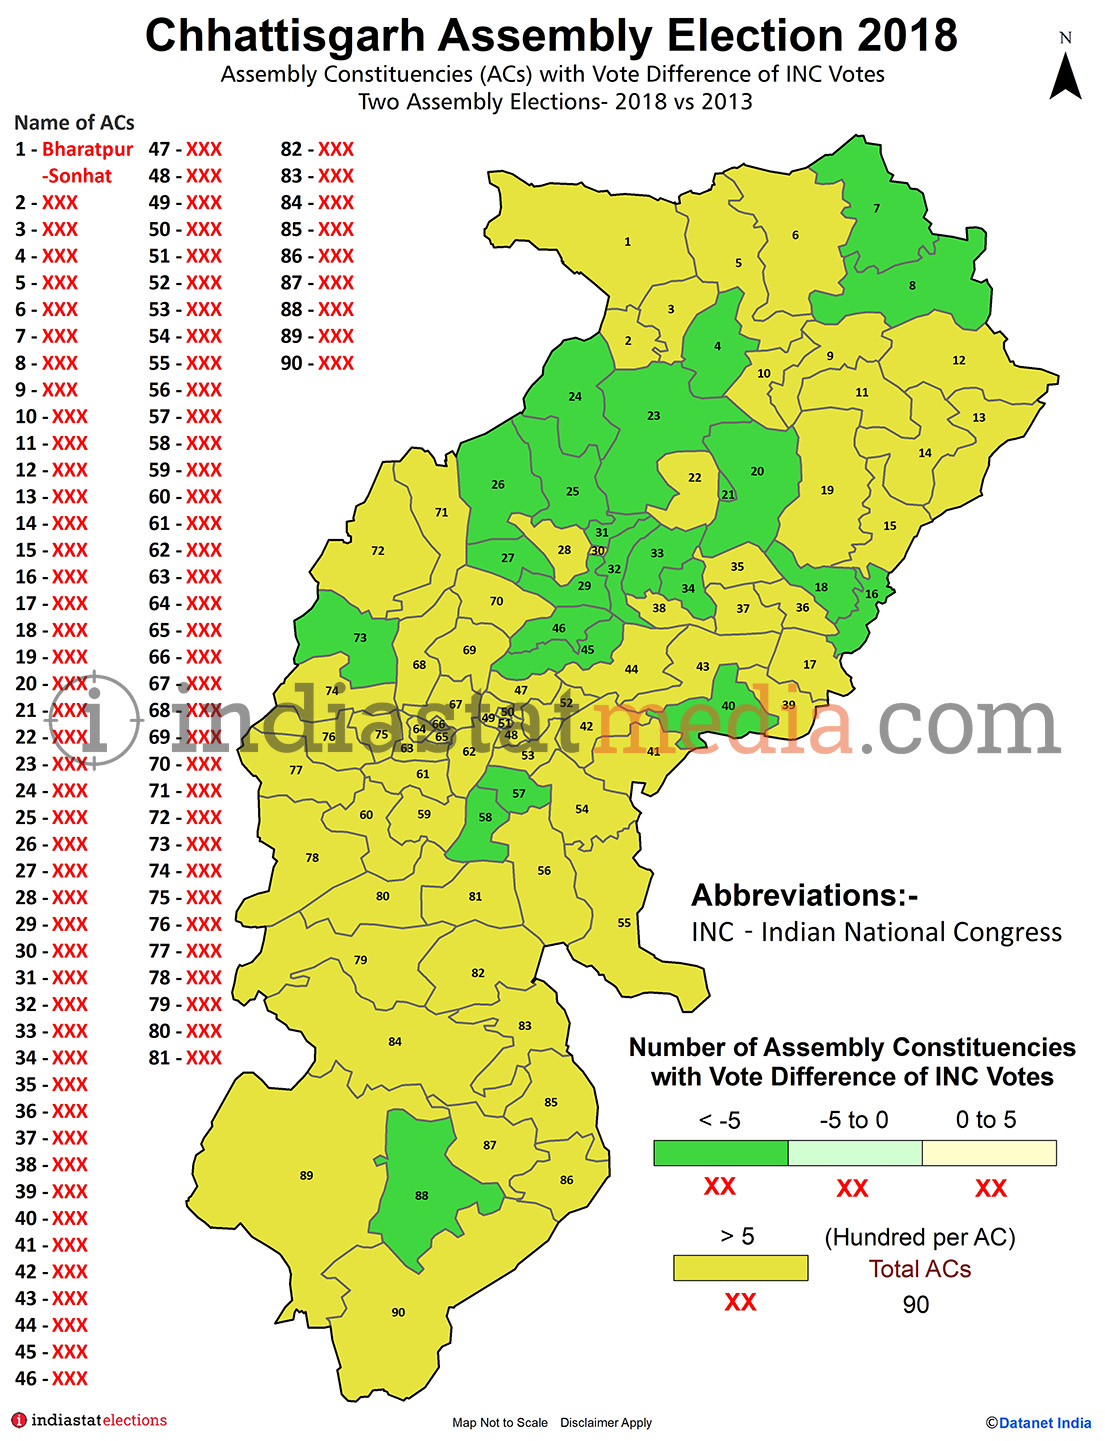 Assembly Constituencies with Vote Difference of INC Votes in Chhattisgarh (Assembly Elections - 2013 & 2018)